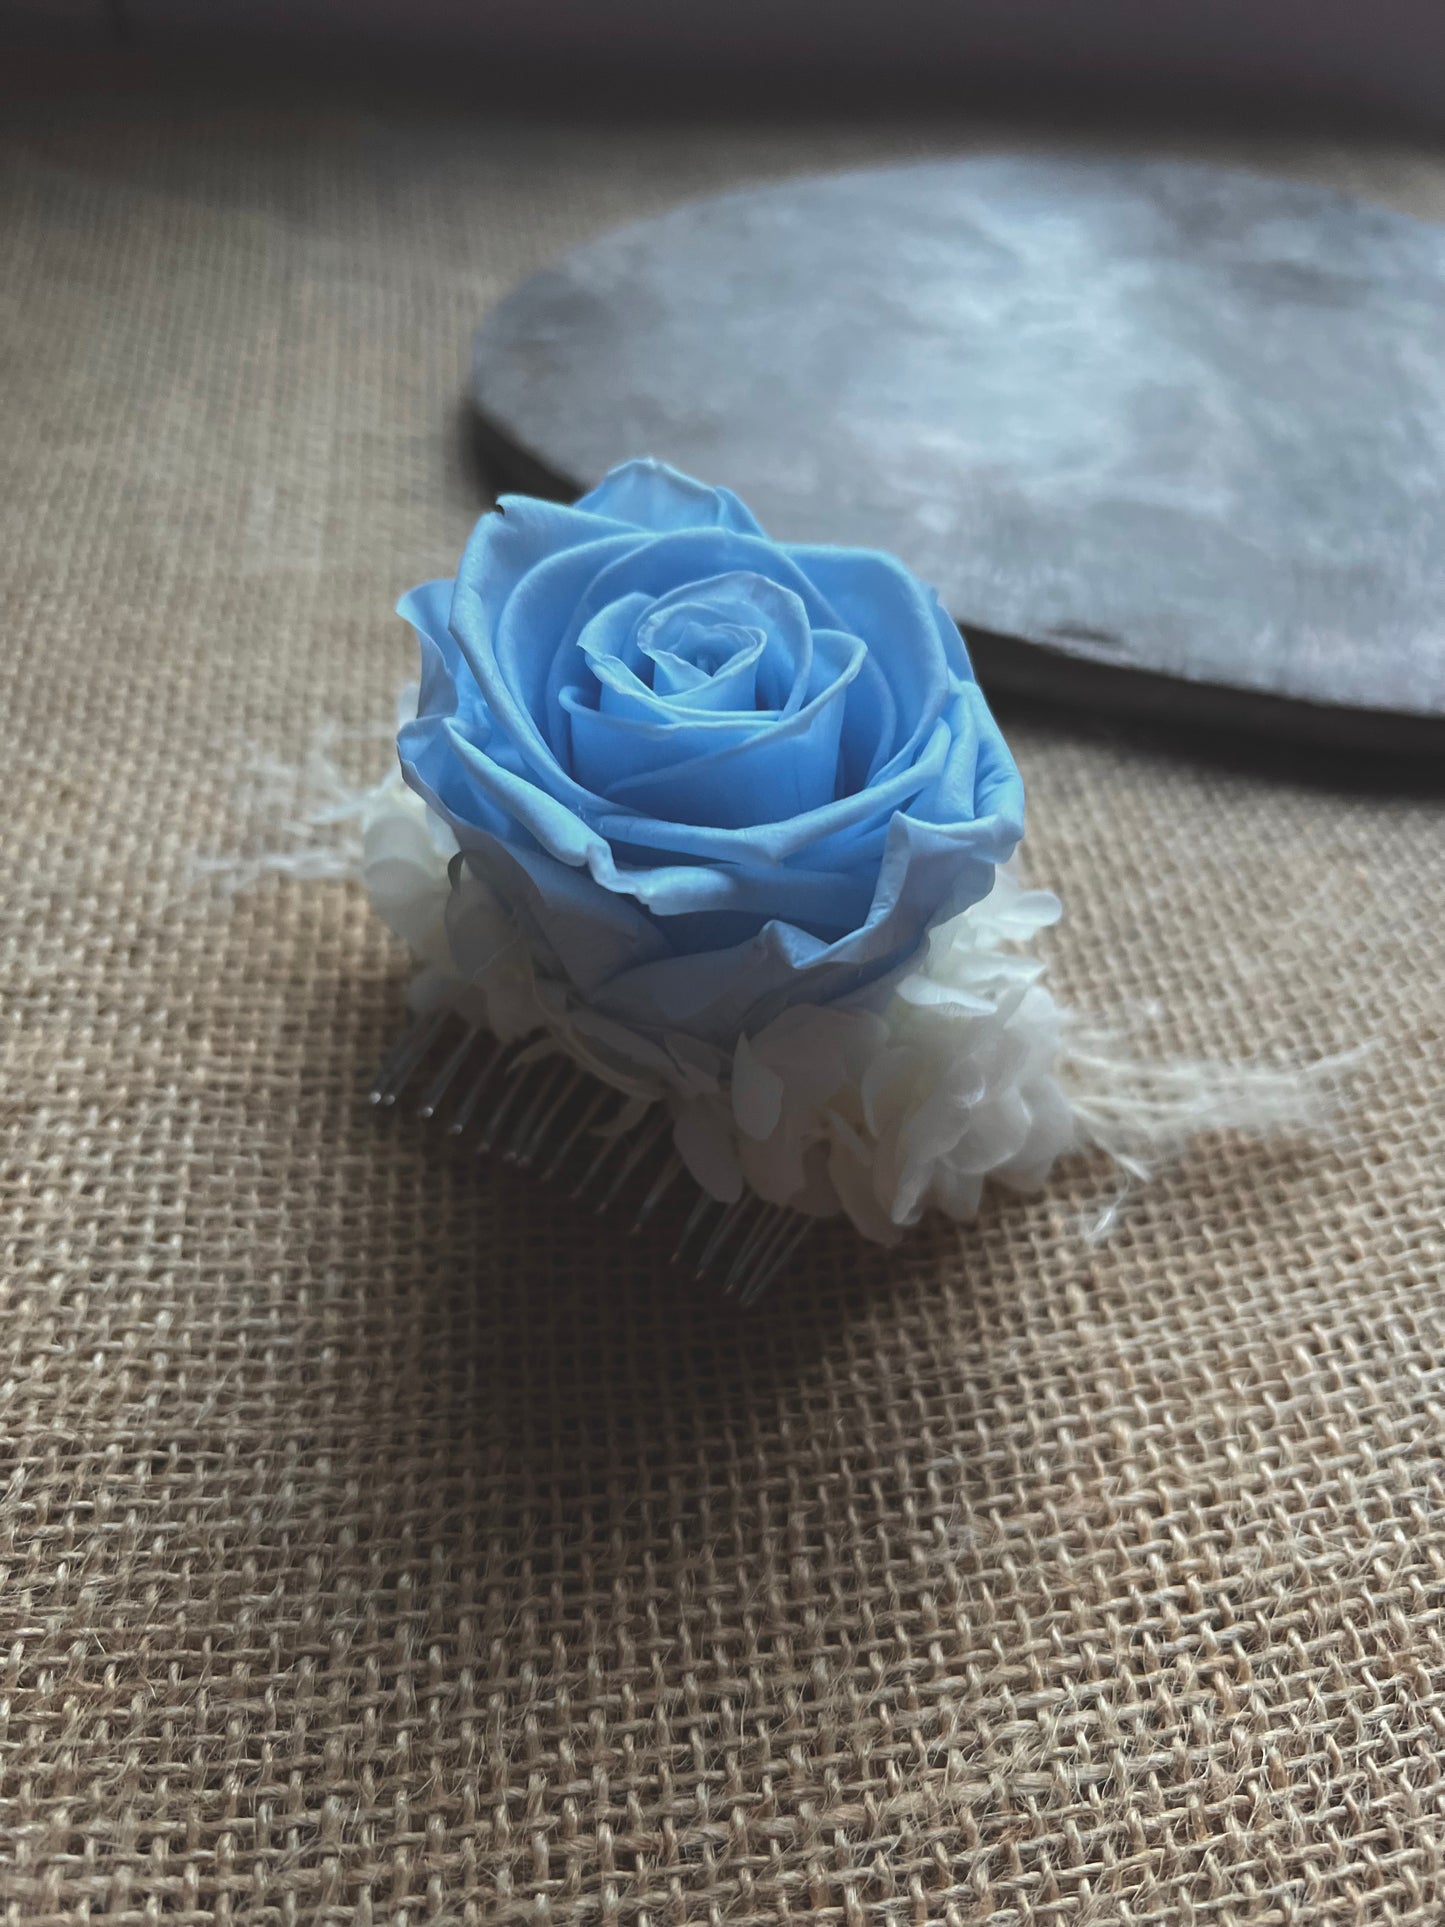 Blue and White Bridal Rose Floral Hair Accessories, Wedding Hair Piece for Brides, Classic Bride Rose Dried Flower Hair Comb Head piece UK